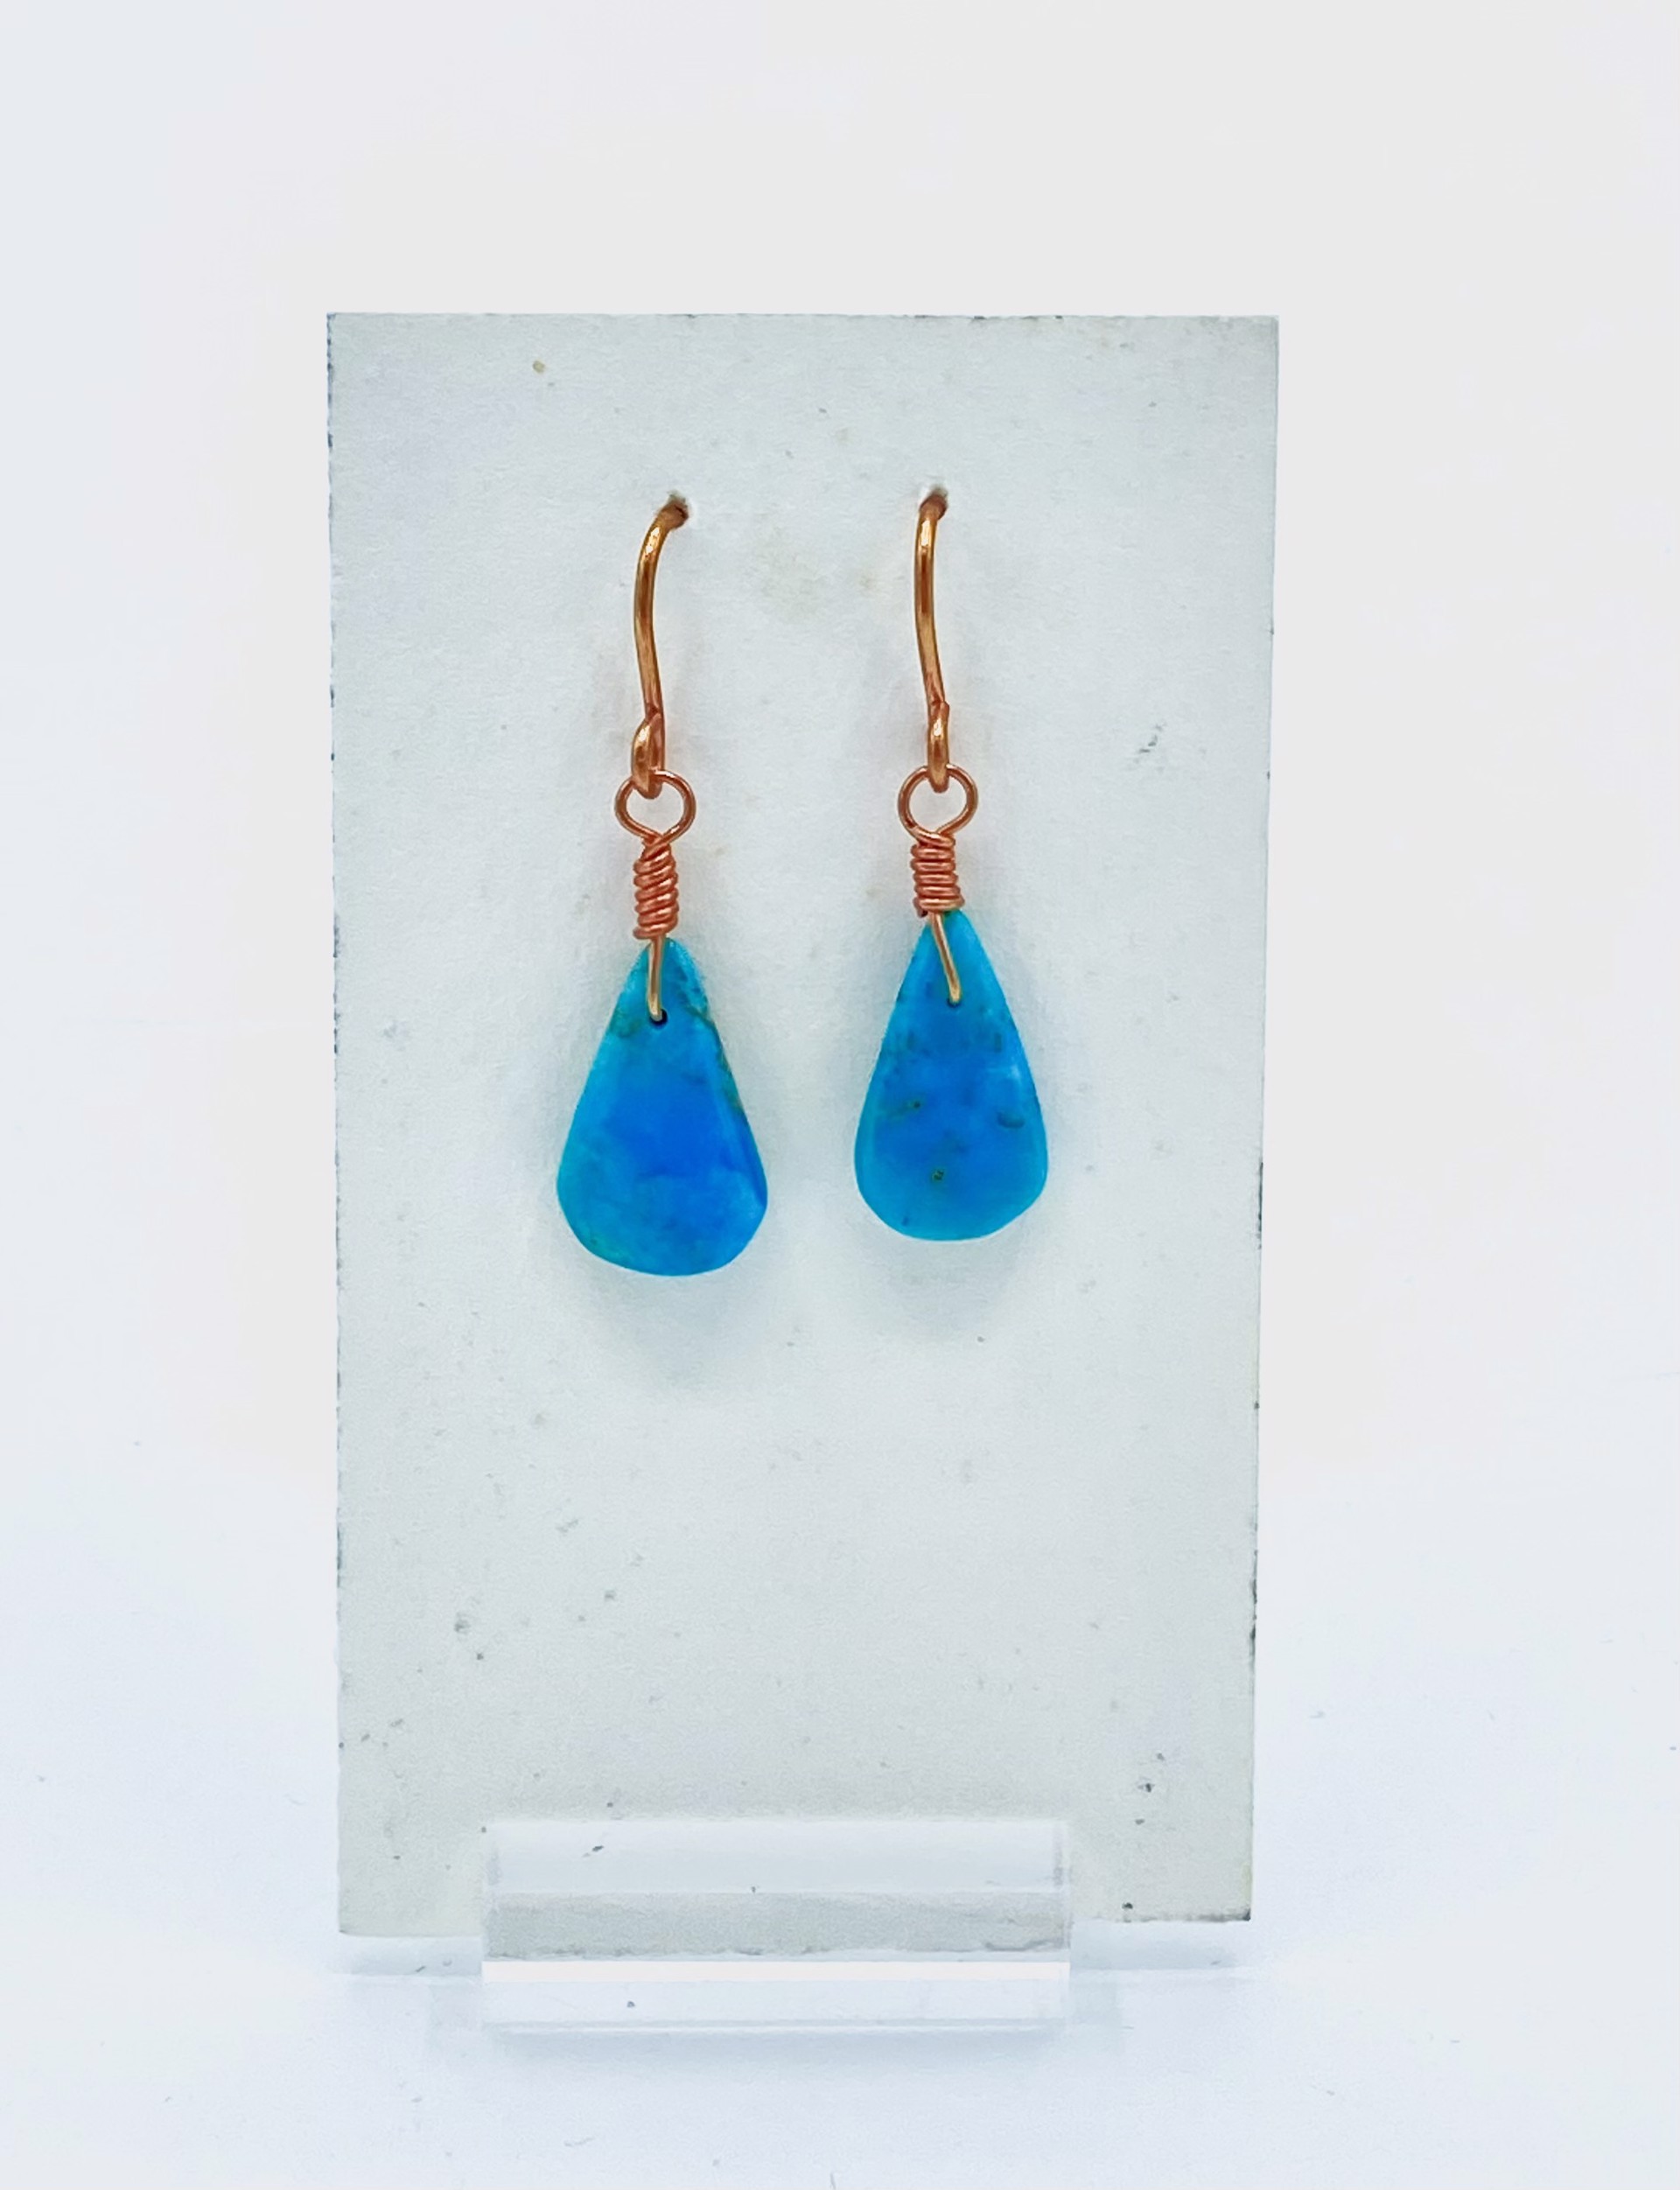 Copper and Turquoise Drop Earrings by Emelie Hebert